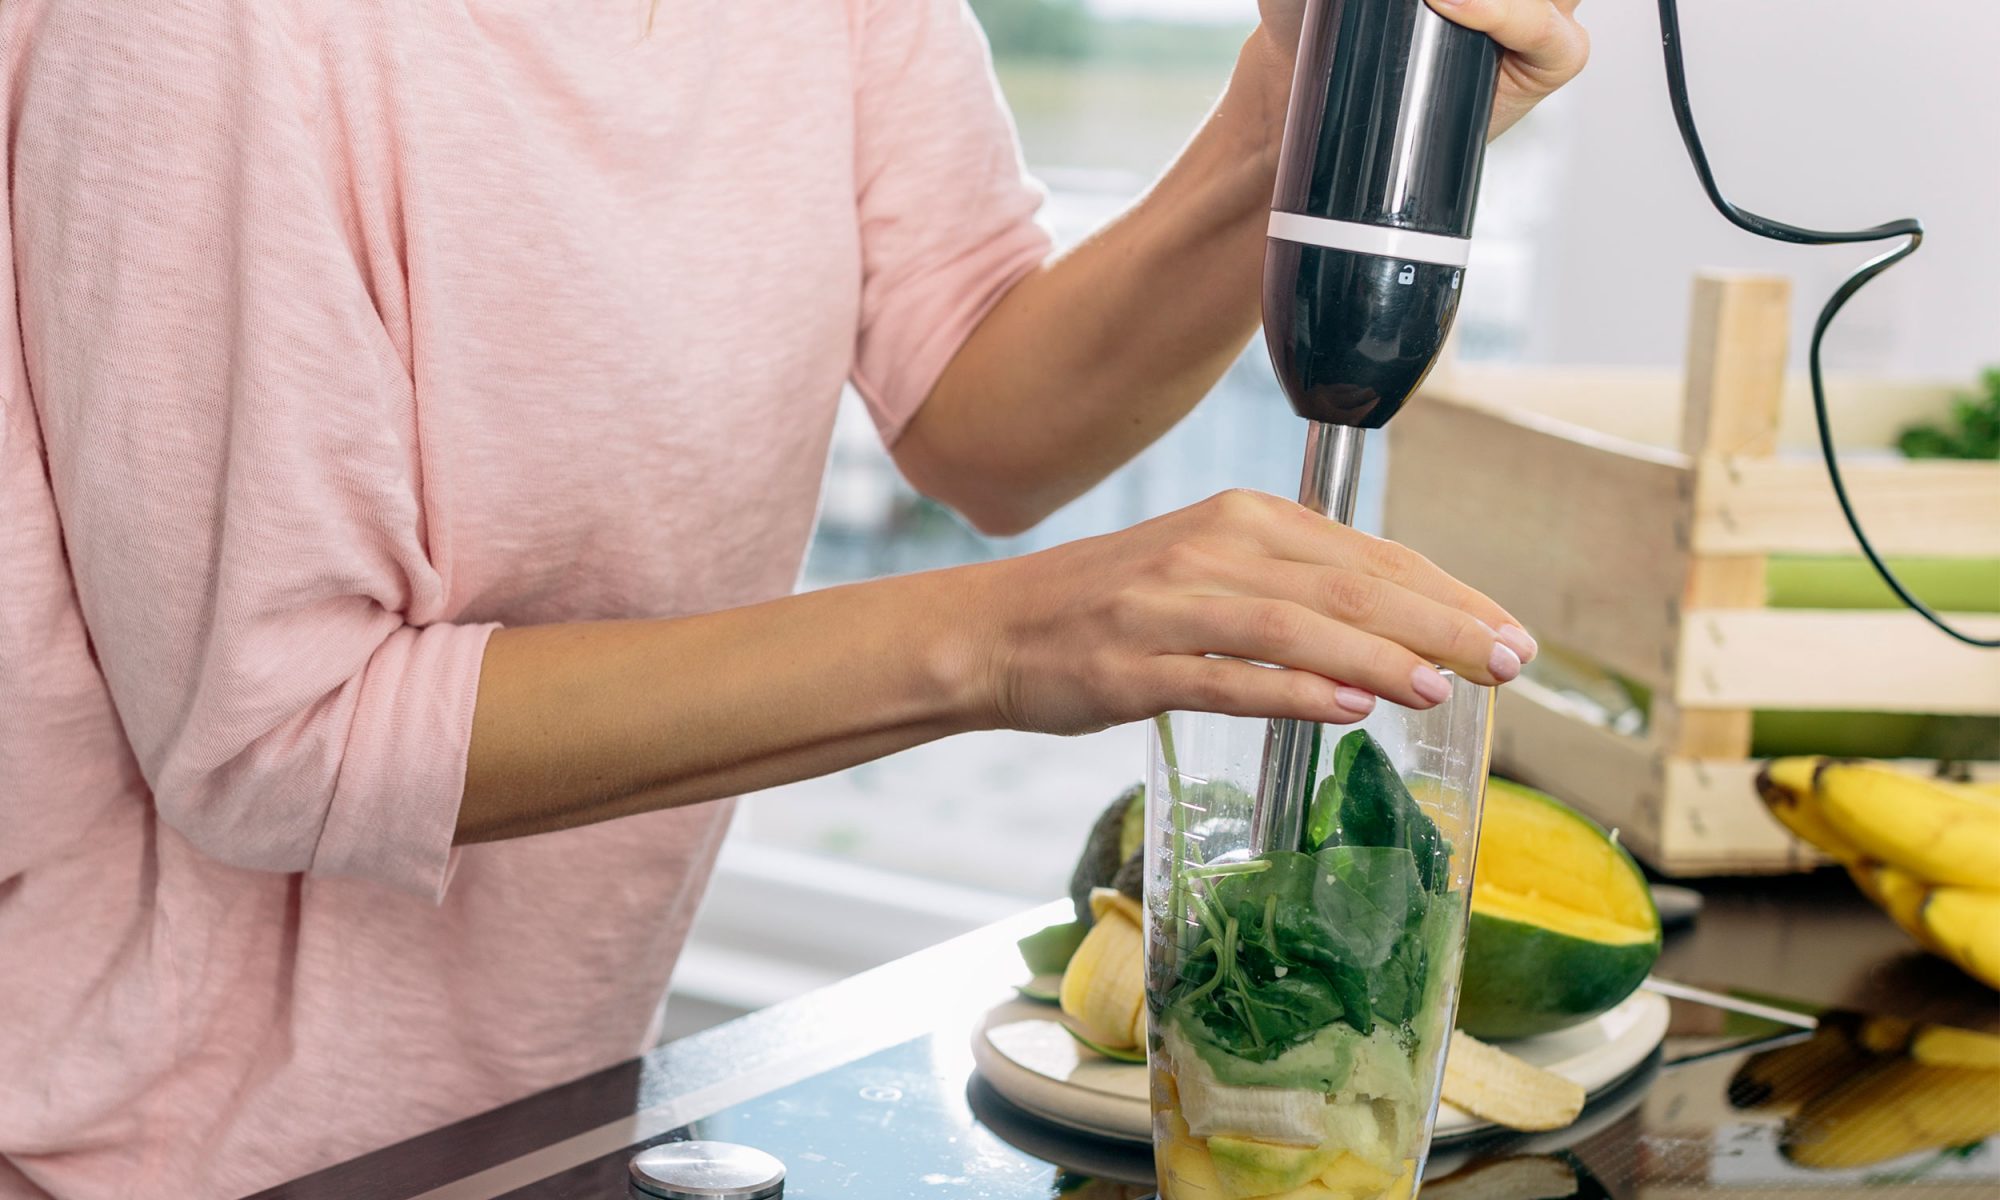 Make Smoothies with an Immersion Blender and Wash Fewer Dishes |